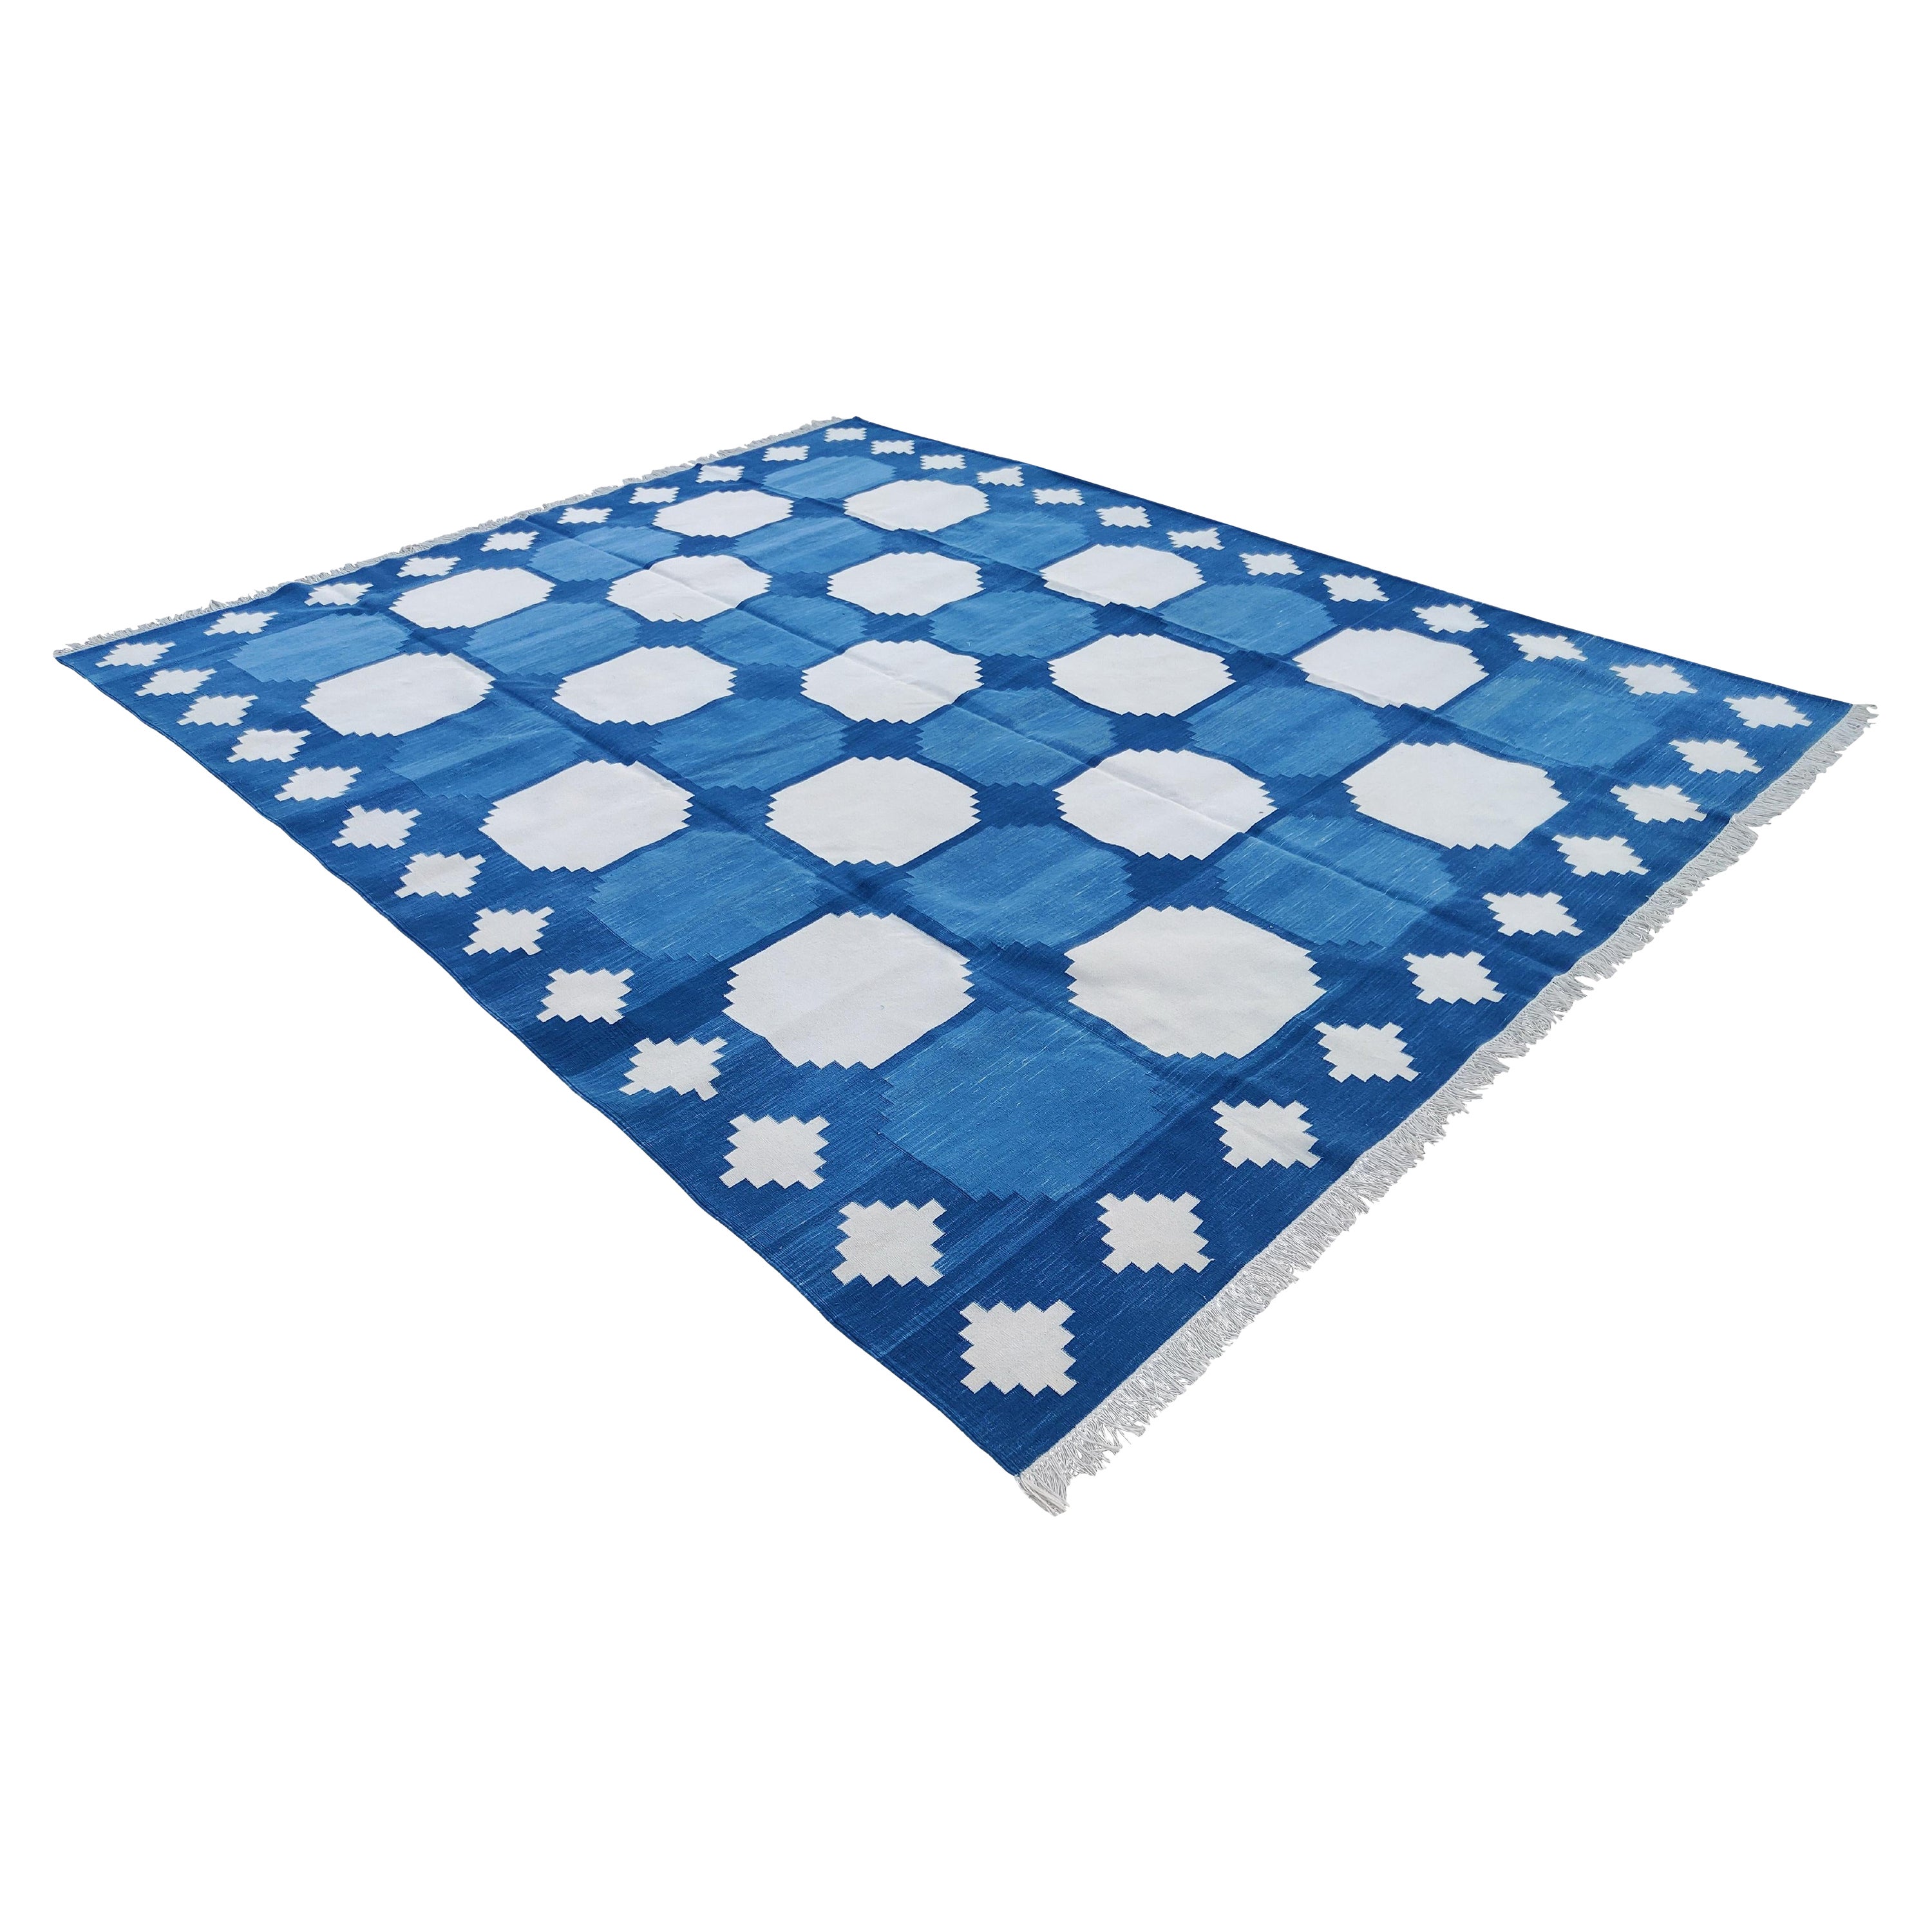 Handmade Cotton Area Flat Weave Rug, Blue And White Geometric Indian Dhurrie-6x9 For Sale